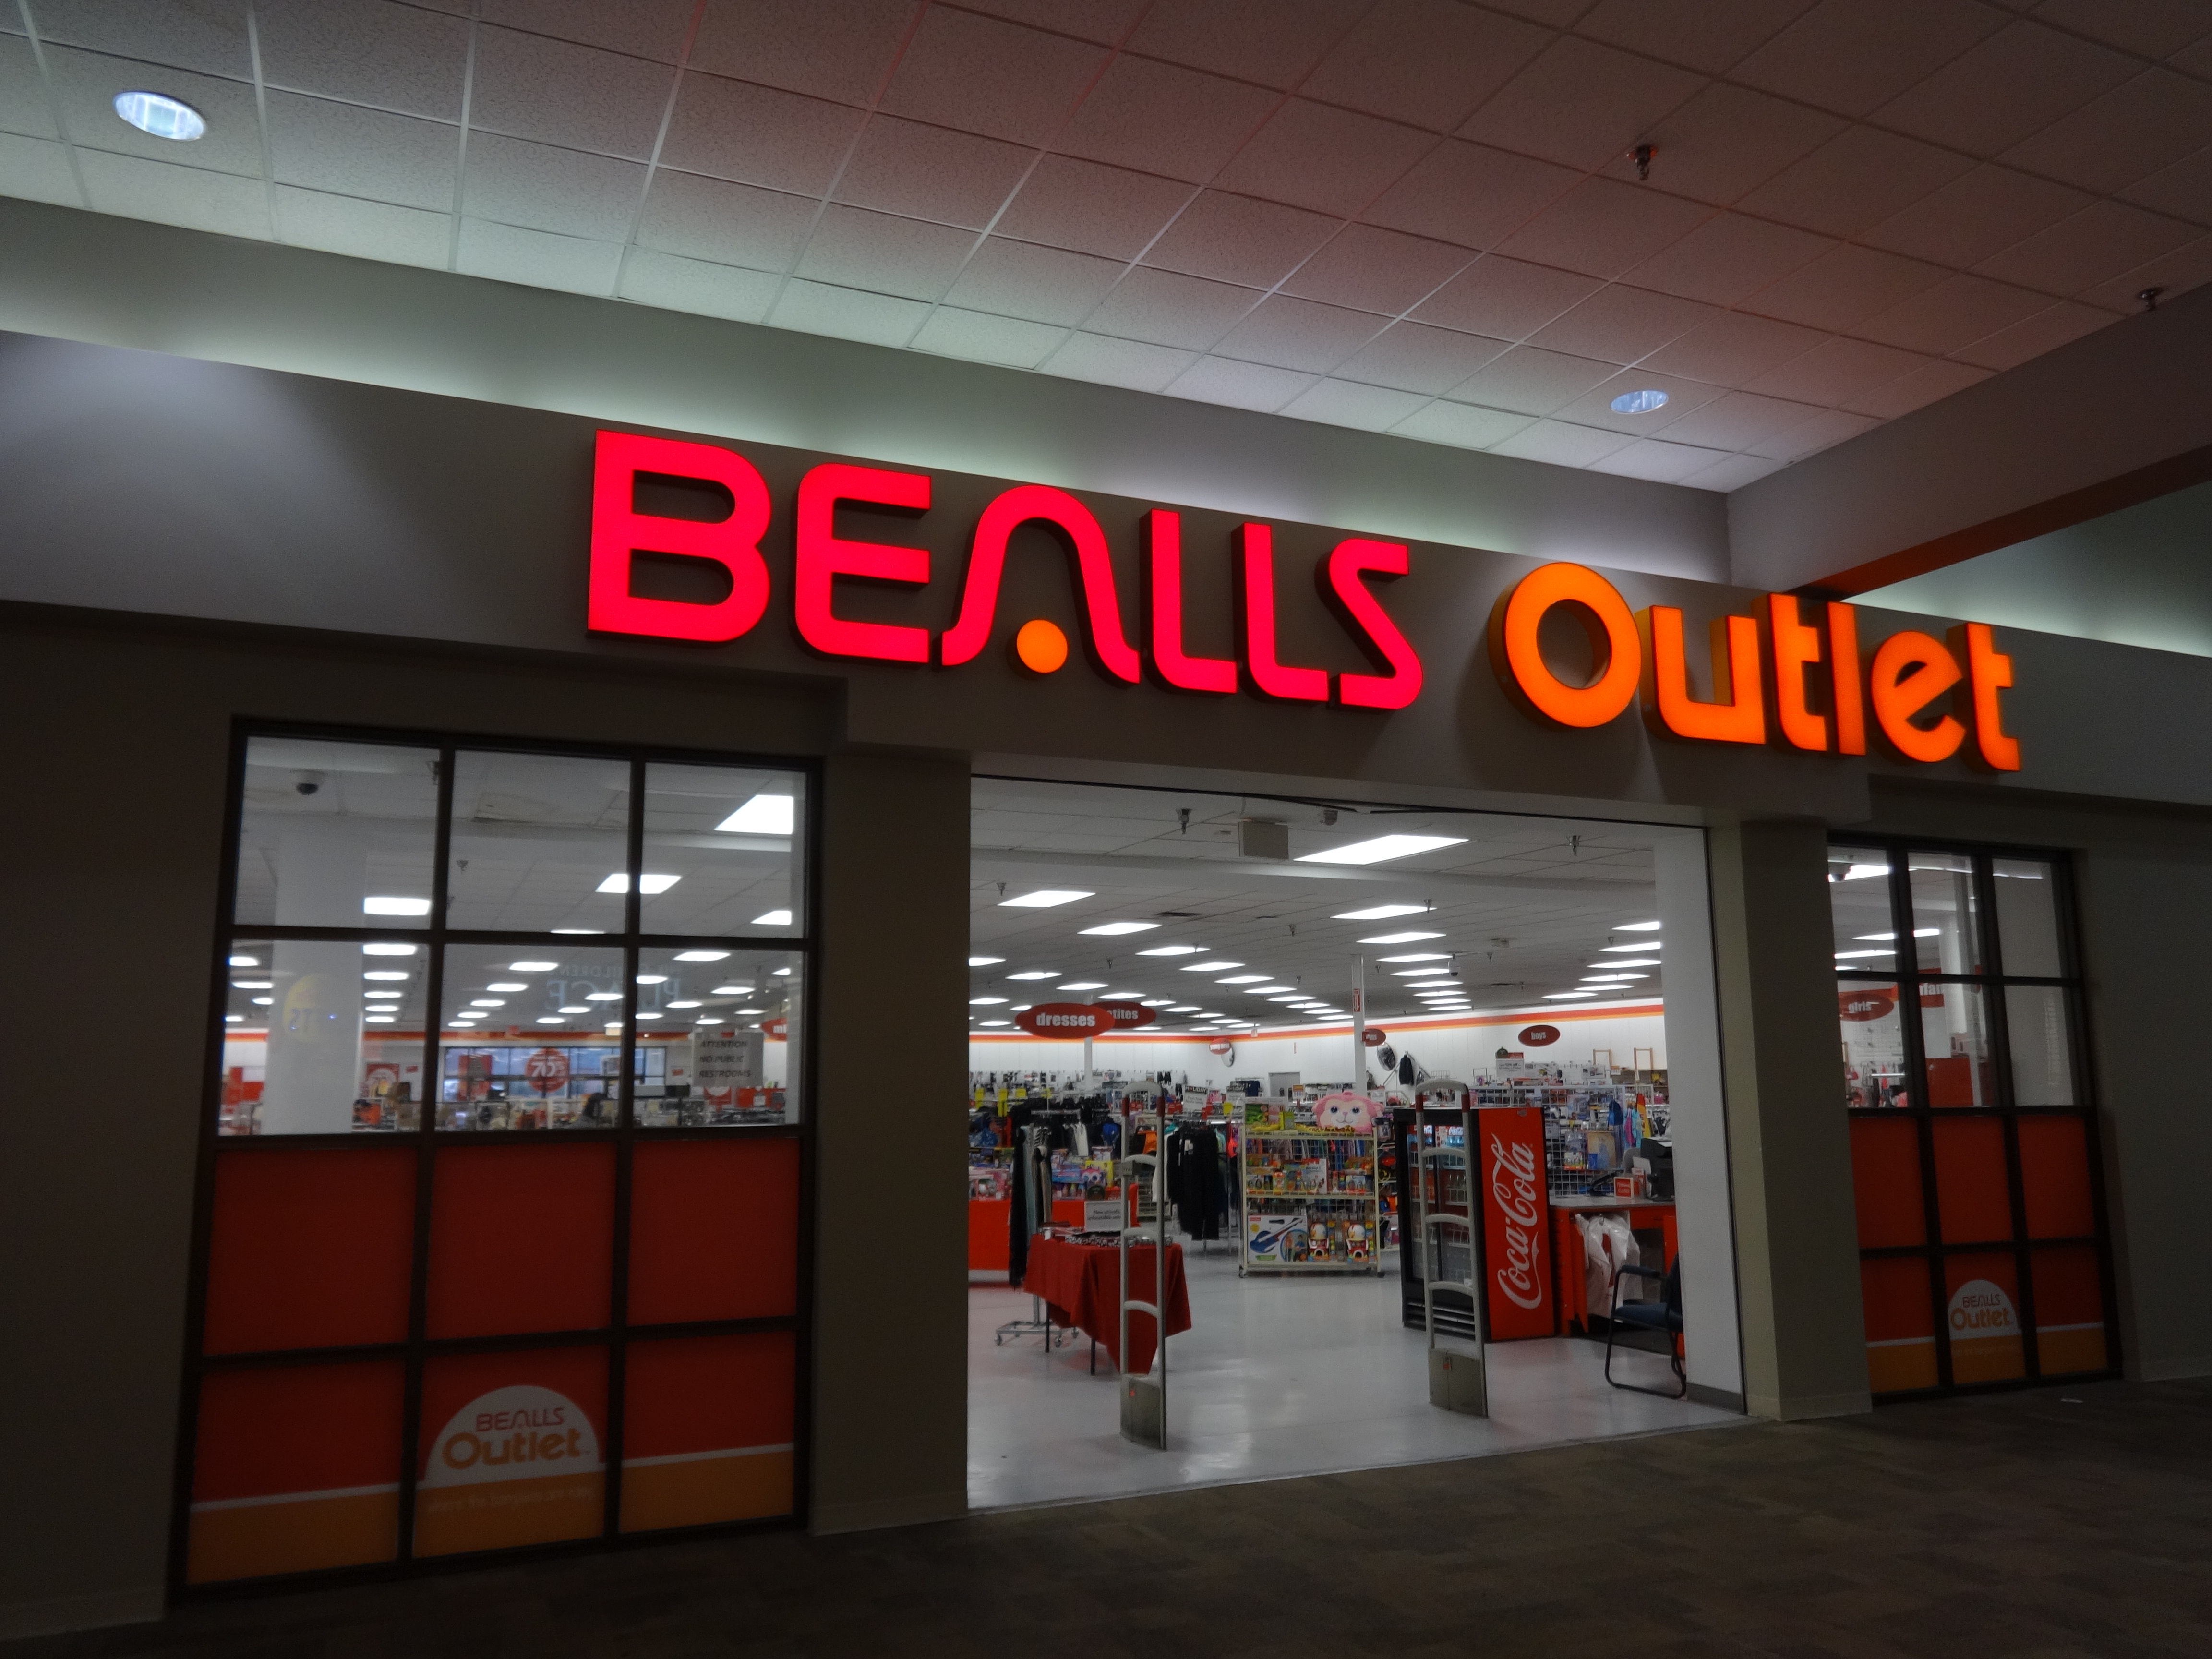 File:Bealls Outlet, Tifton Mall.JPG - Wikimedia Commons